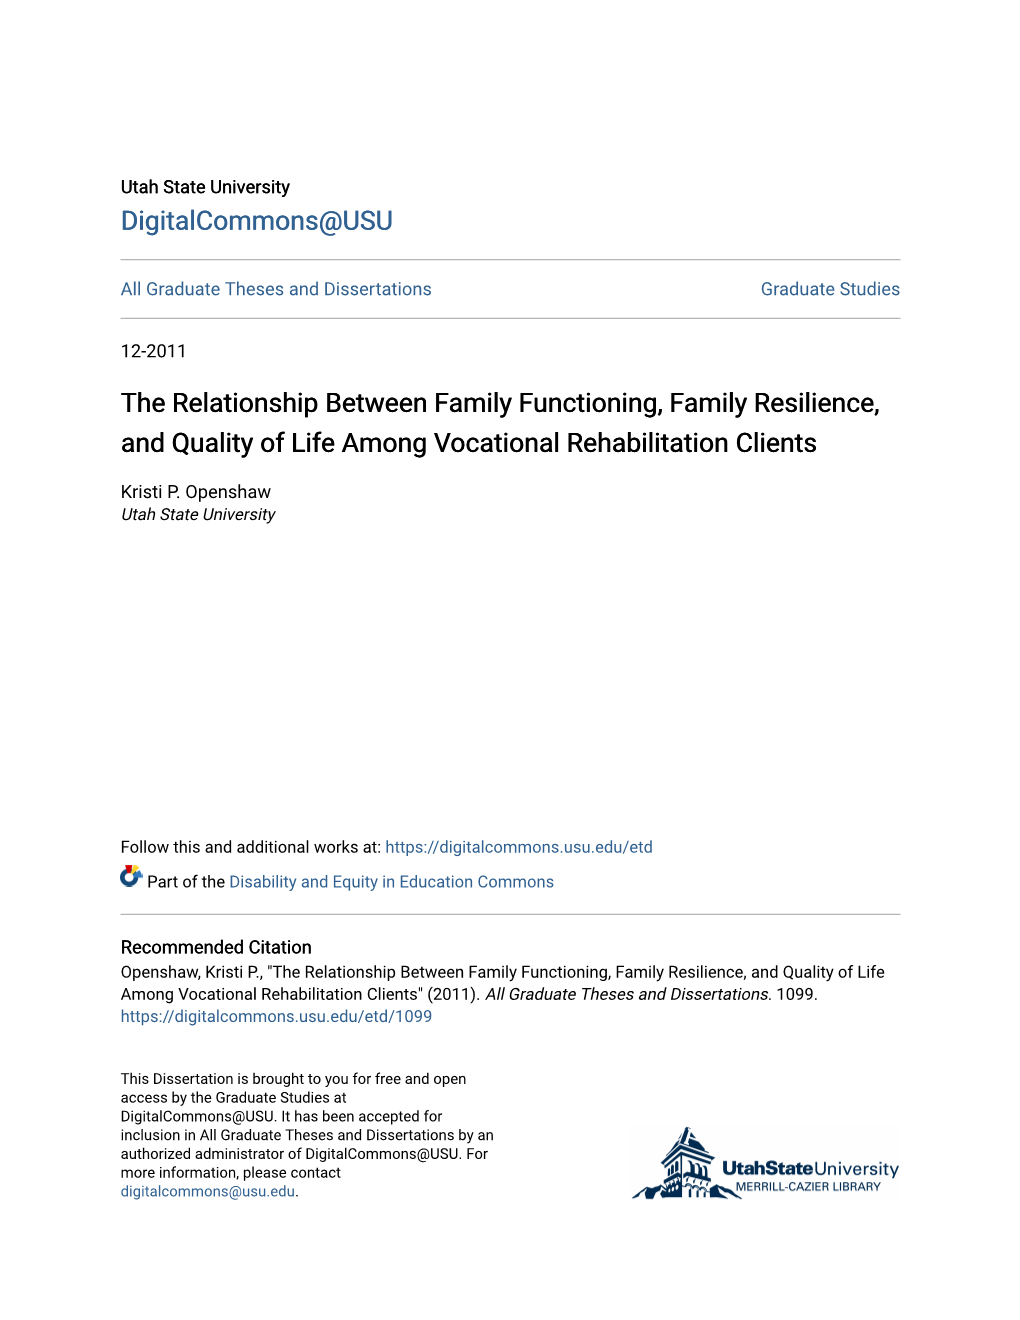 The Relationship Between Family Functioning, Family Resilience, and Quality of Life Among Vocational Rehabilitation Clients